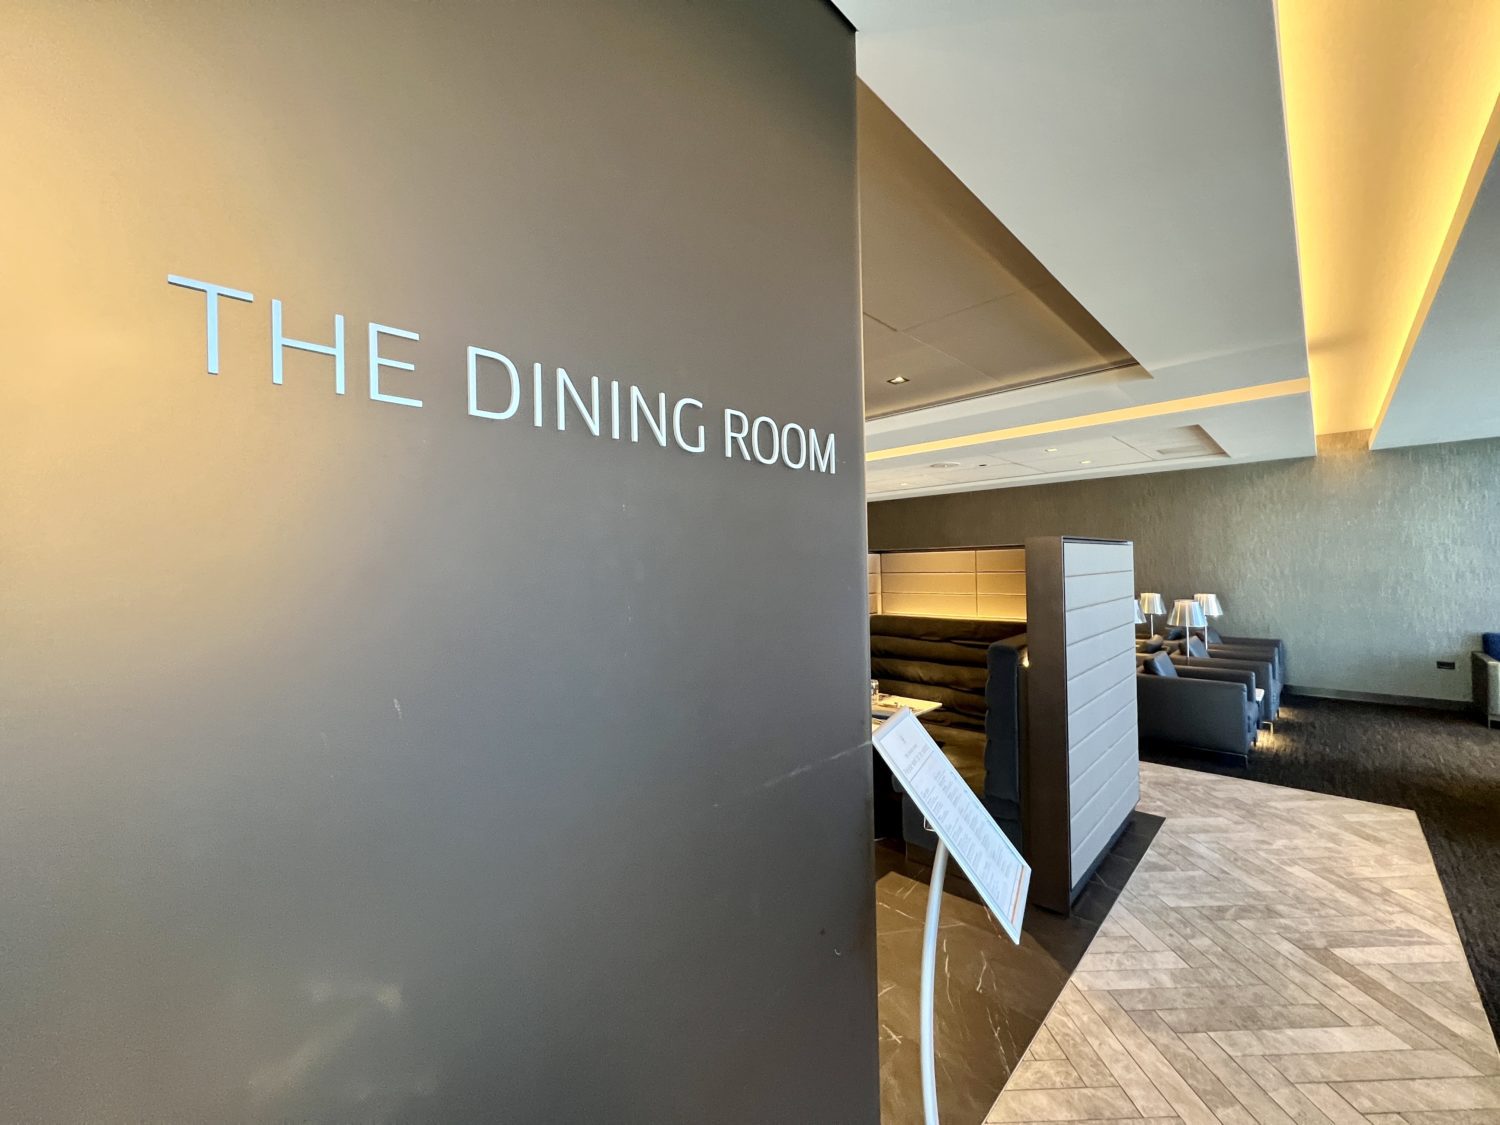 united polaris lounge chicago dining room  Beautiful But Busy: United Polaris Lounge Chicago-O&#039;Hare (ORD) Review – Thrifty Traveler &#8211; Thrifty Traveler united polaris lounge chicago dining room scaled